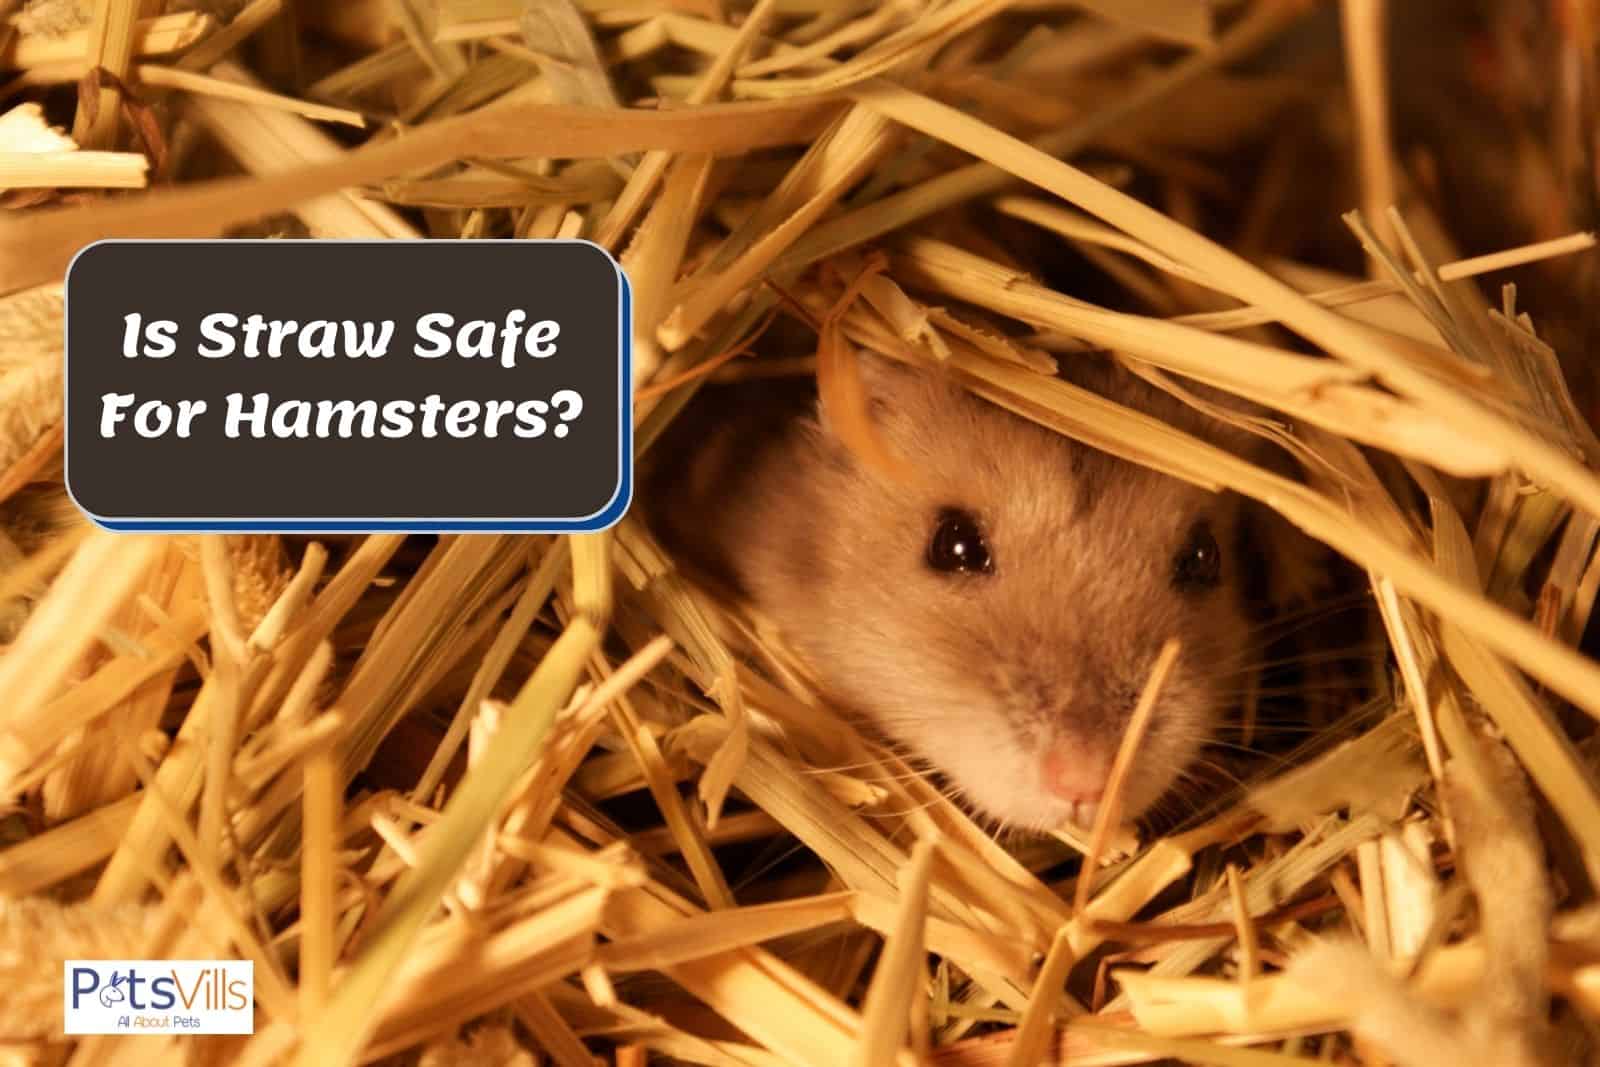 a hamster on a straw bedding